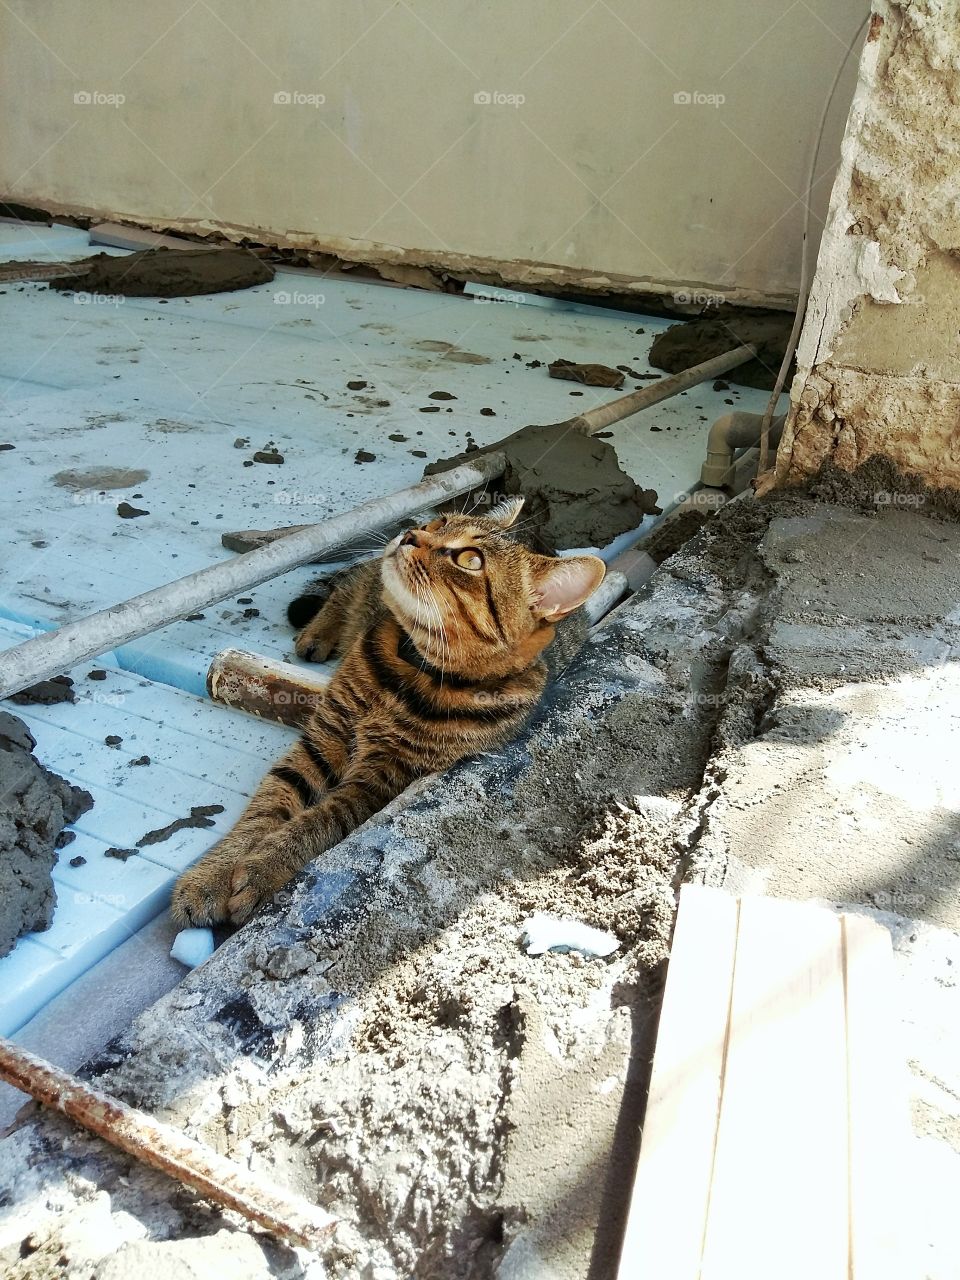 the cat is resting on the construction site